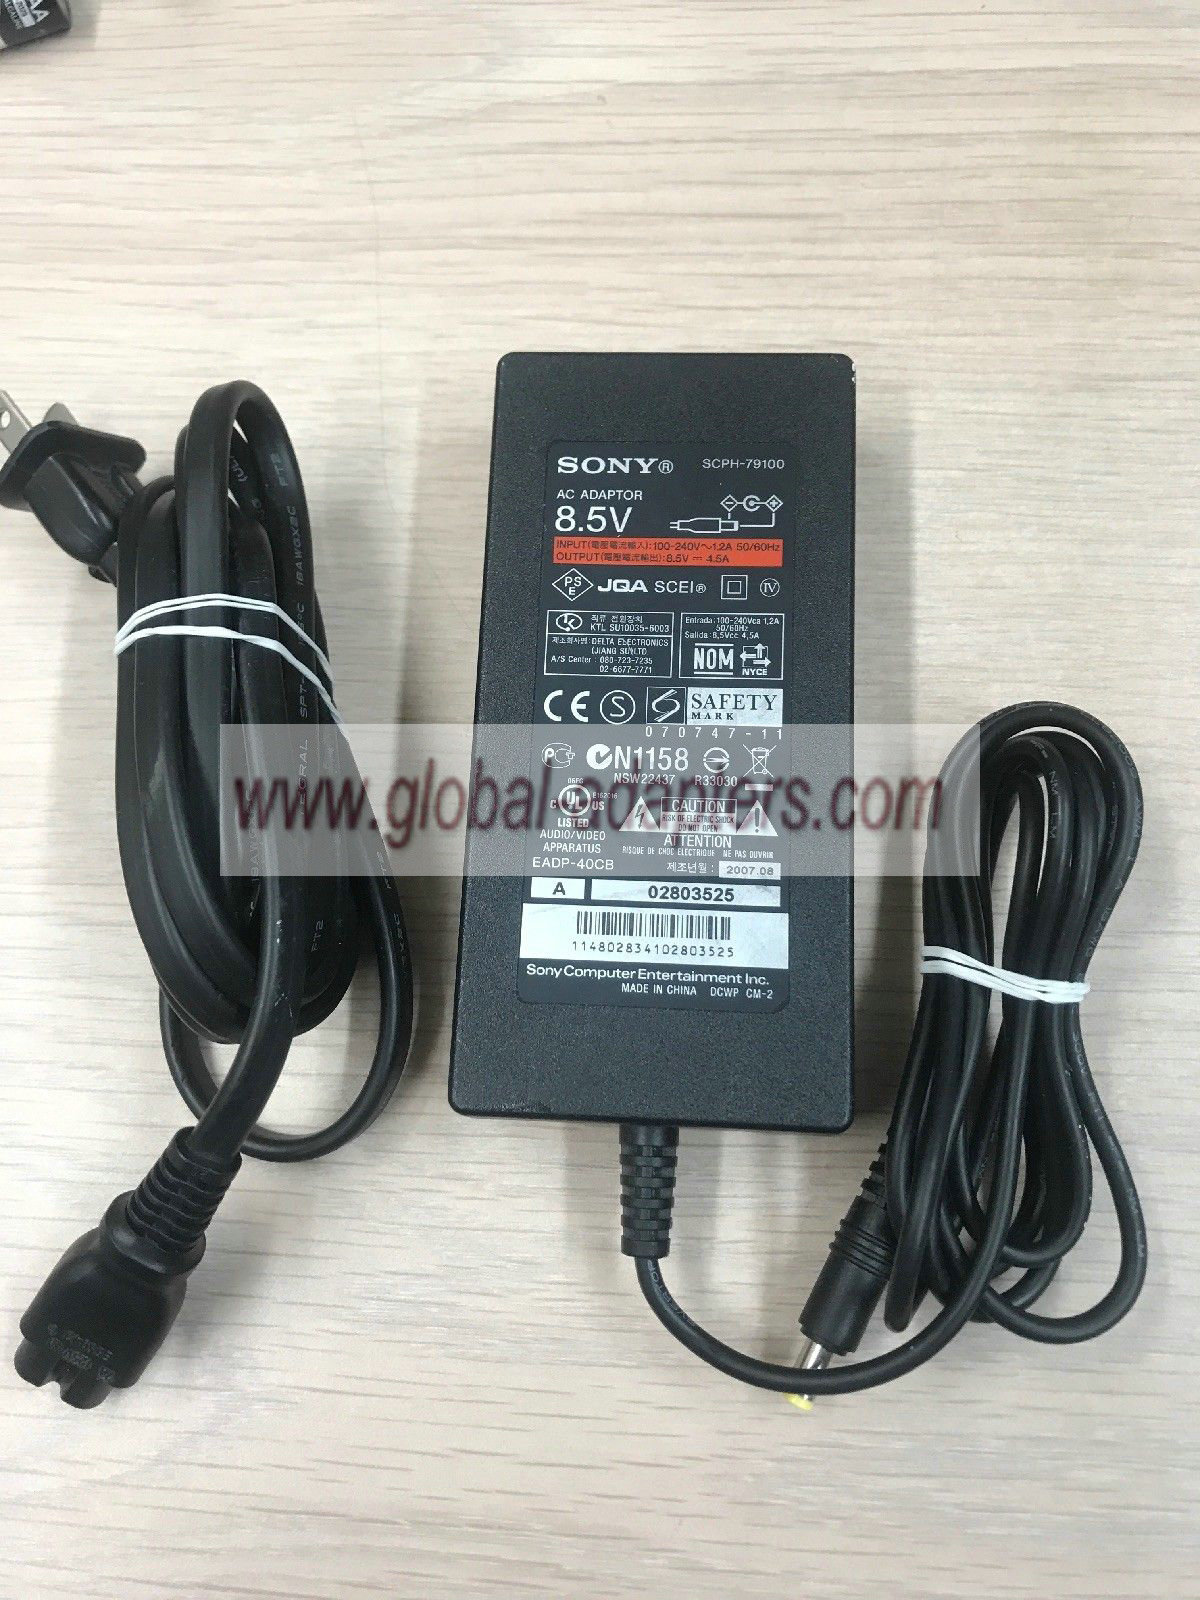 New Sony SCPH-79100 8.5V DC 4.5A Playstation 2 AC Power Supply Adapter